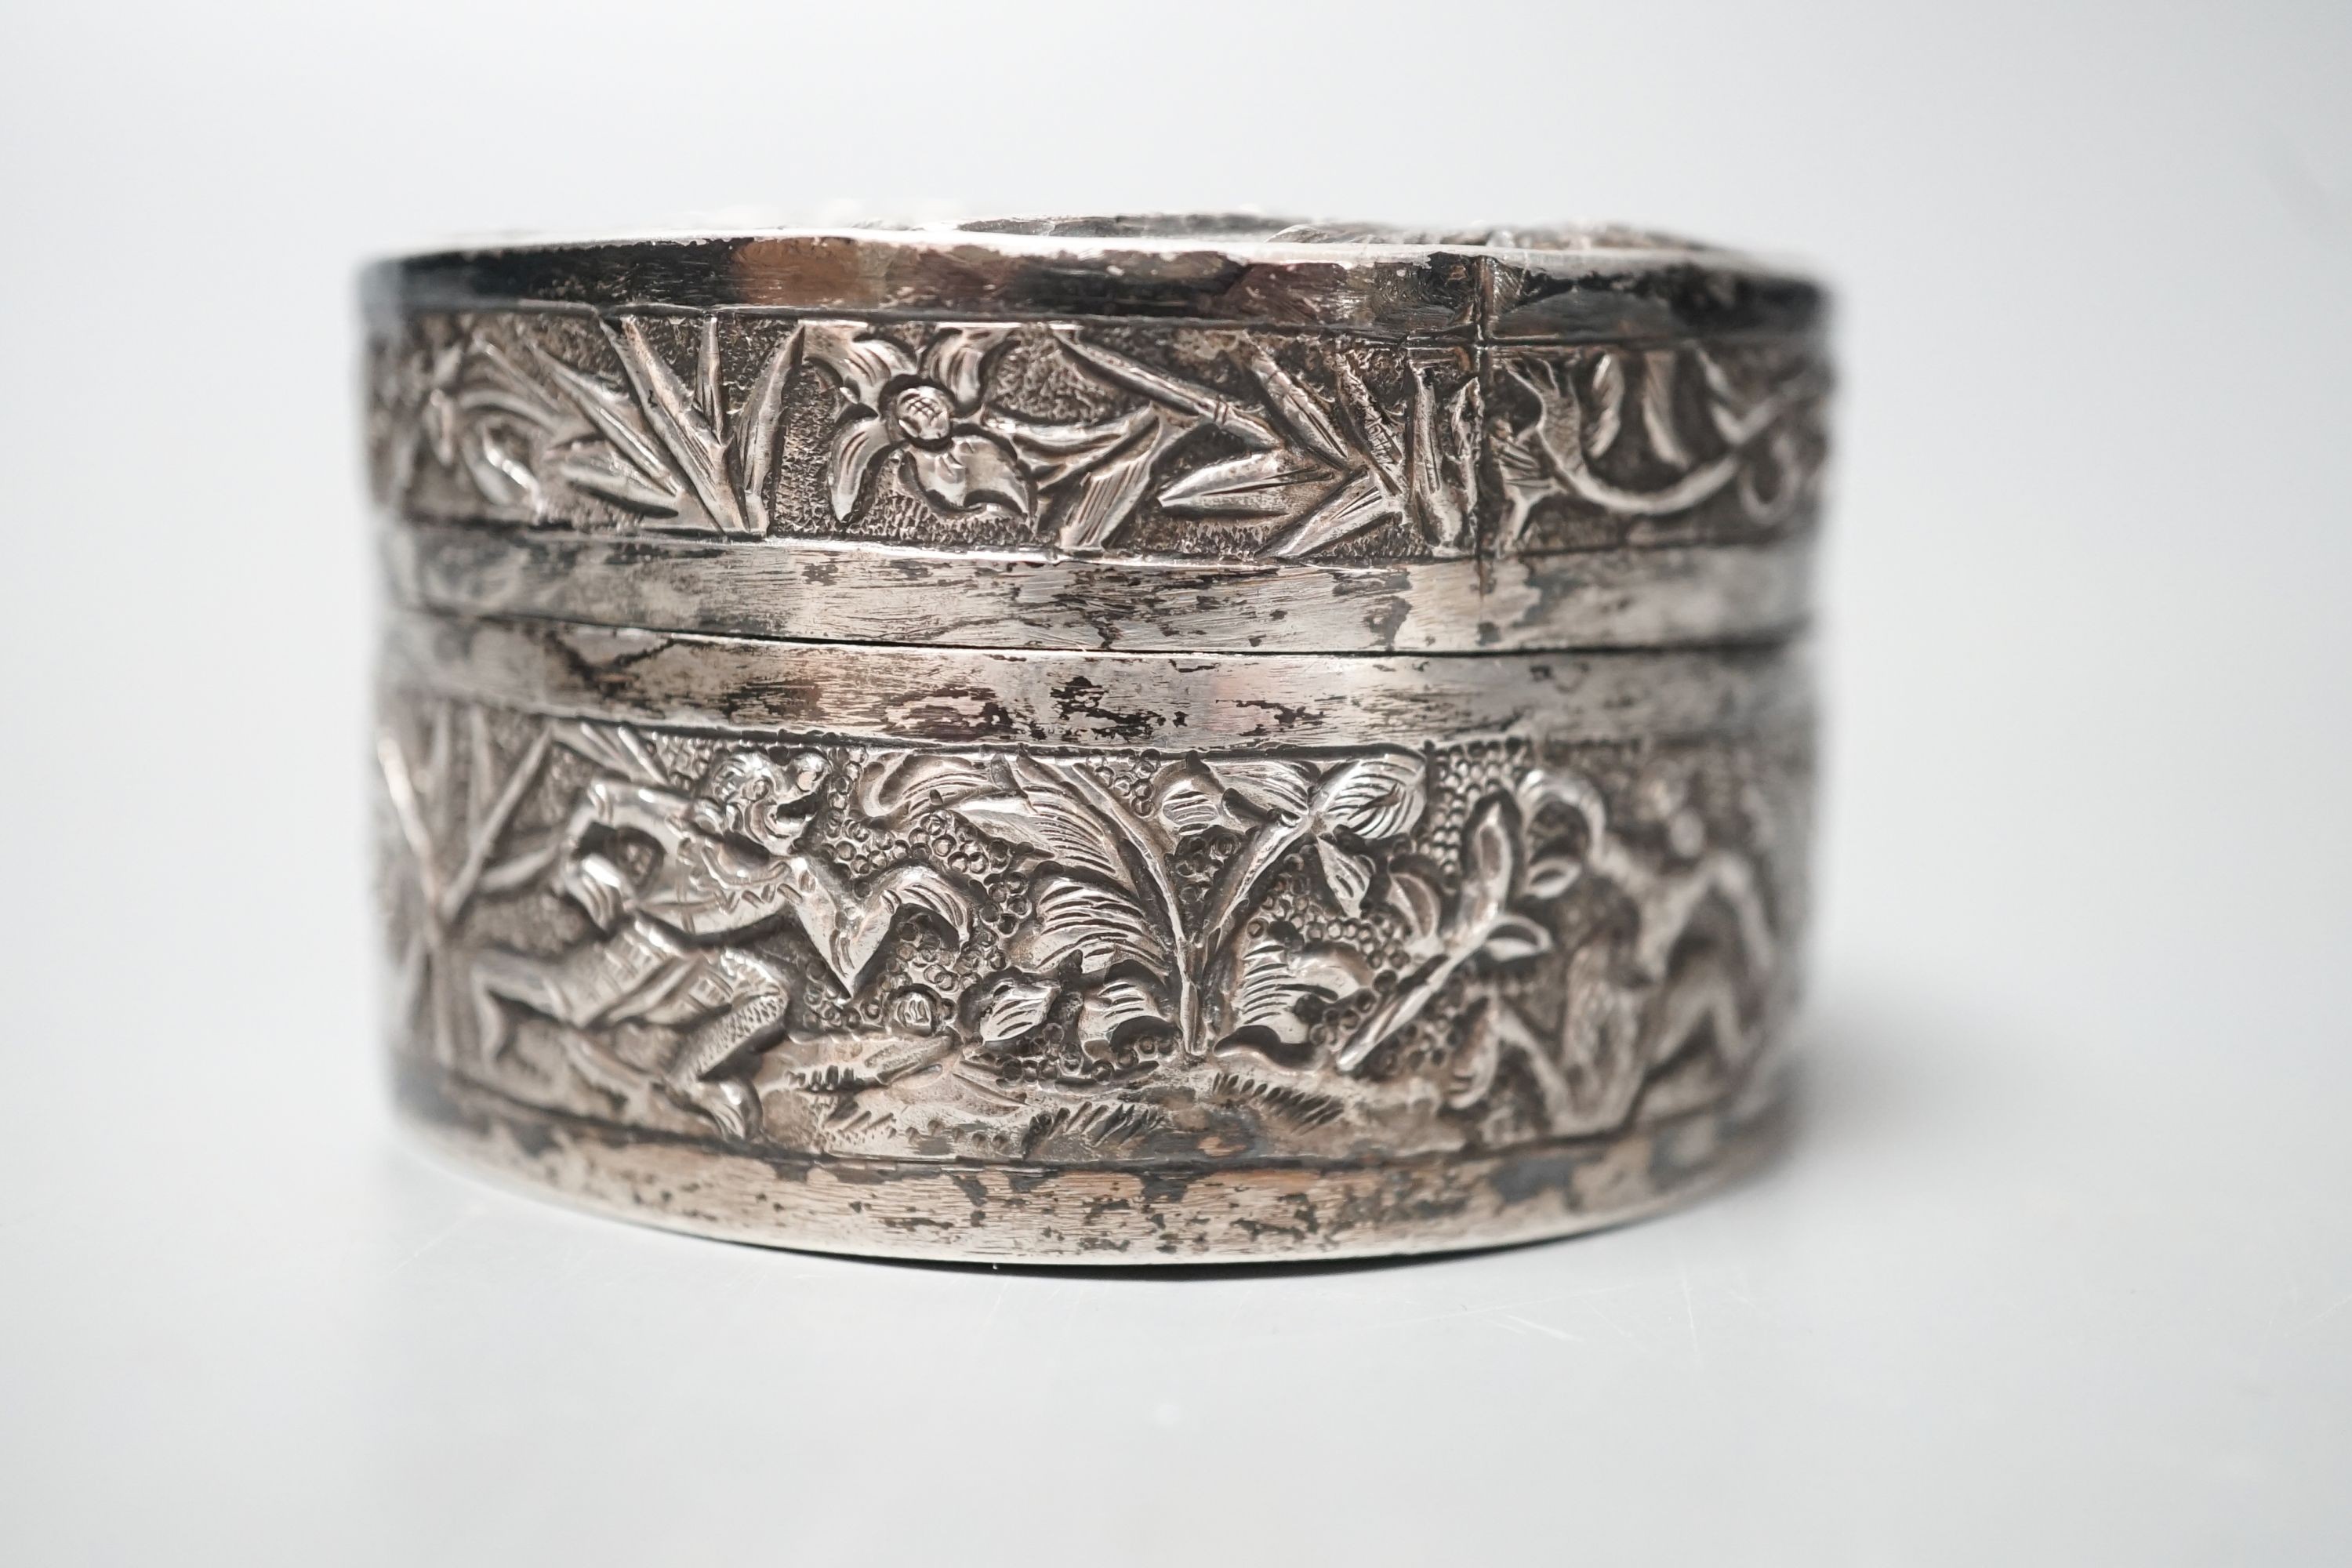 A Chinese embossed white metal circular box and cover, late 19th century, diameter 61mm.